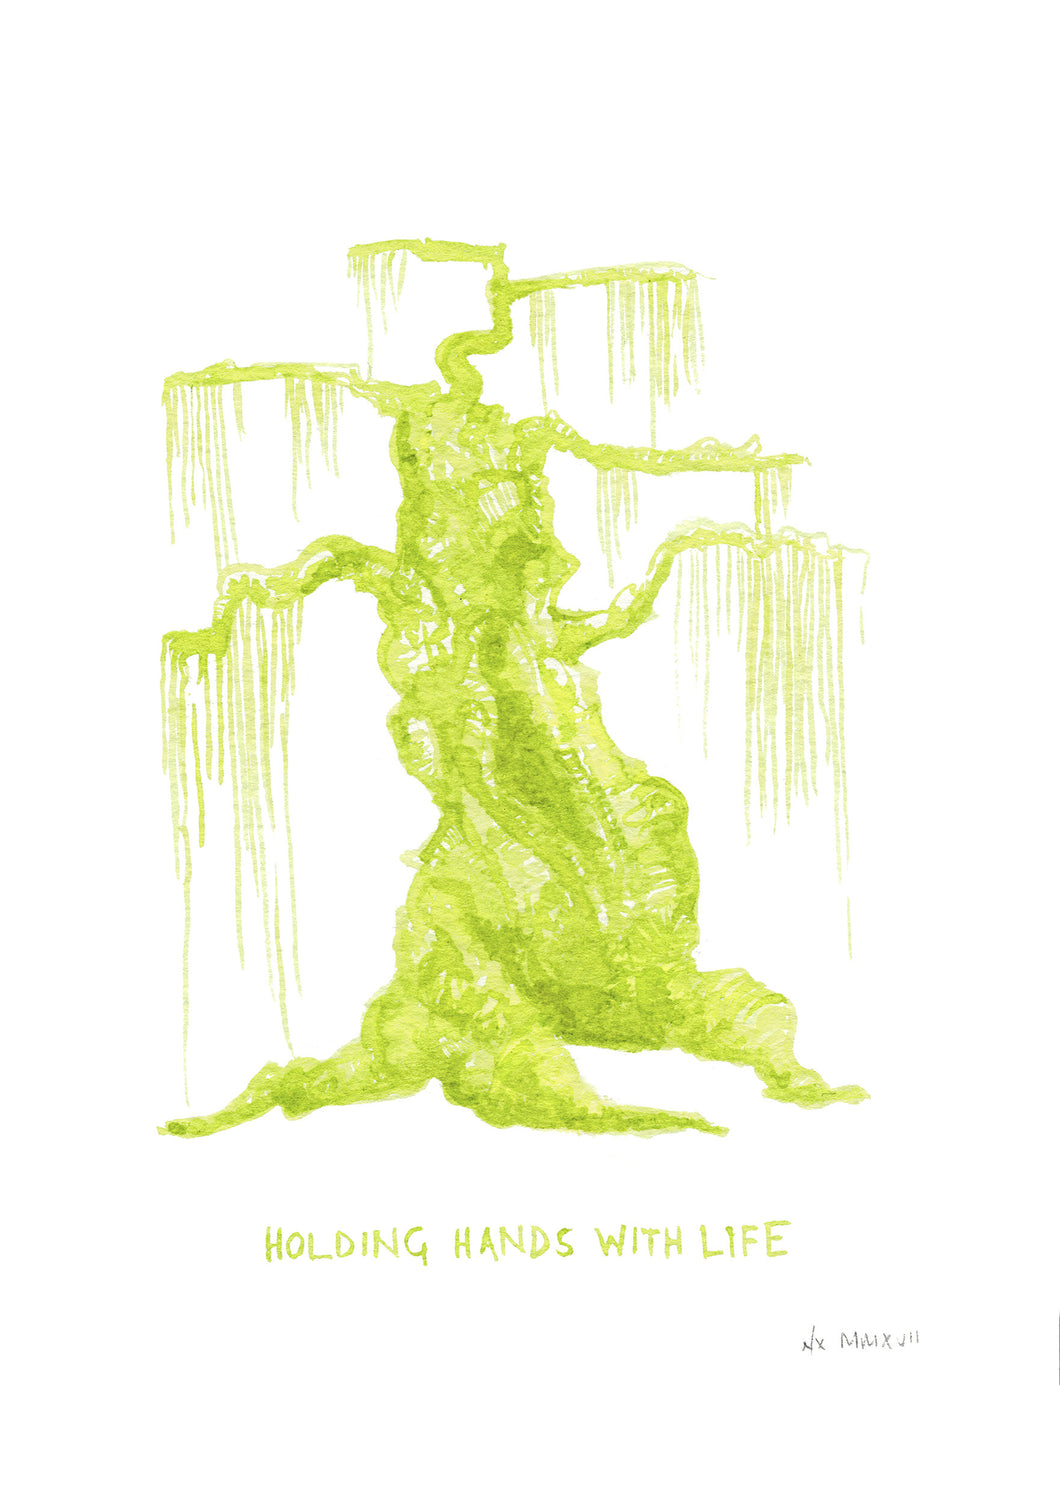 5. Holding hands with life